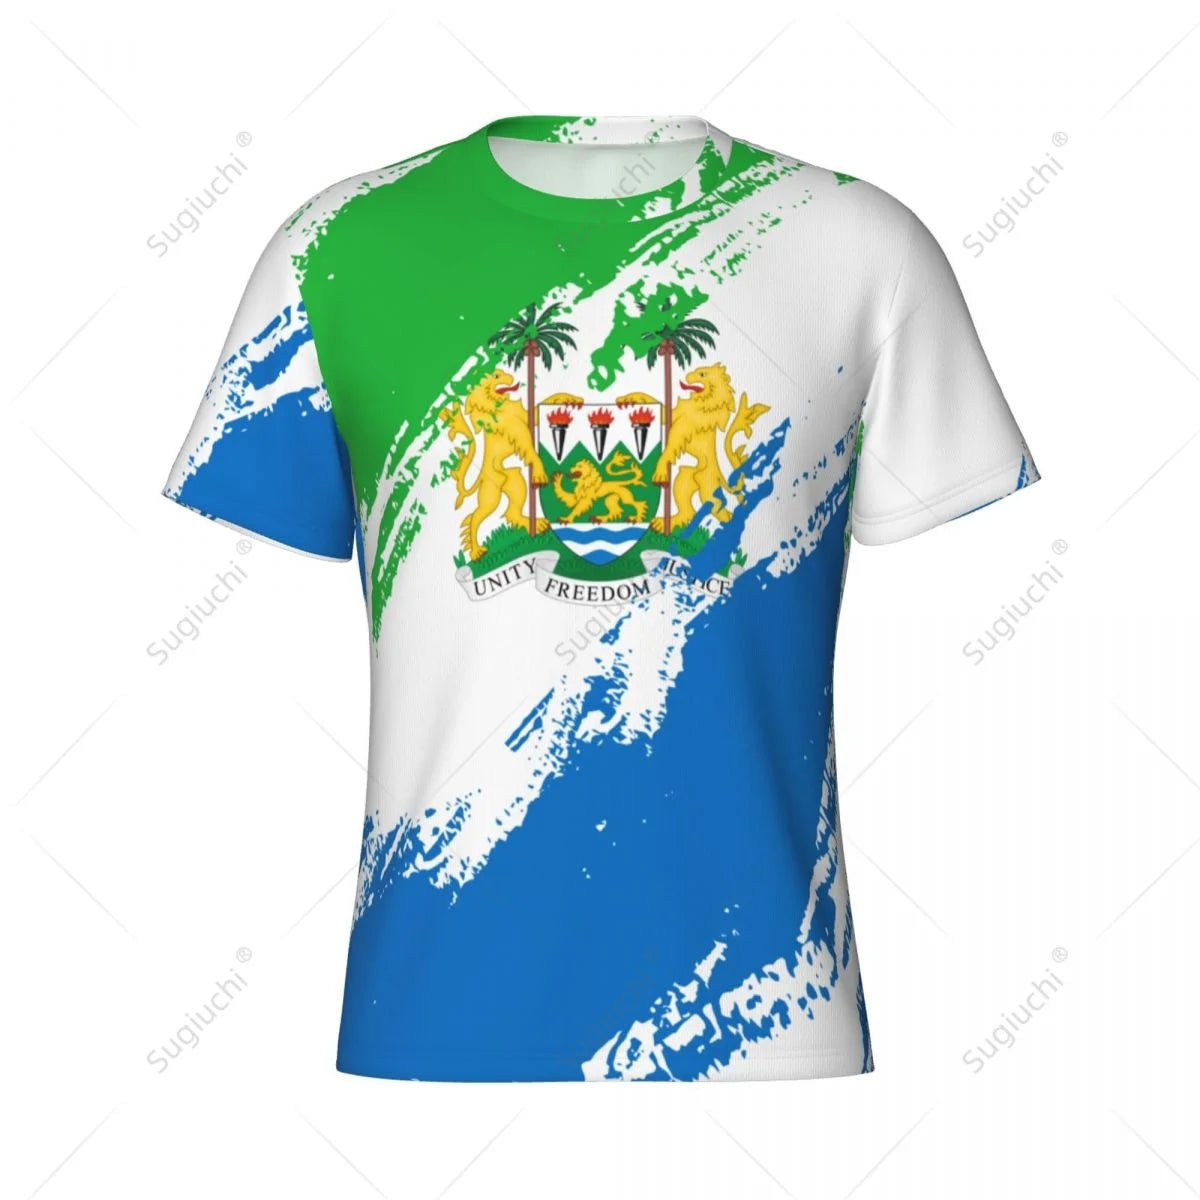 Custom Sierra Leone Sports T-shirt, Jersey, Polo For Soccer and Sport Fans